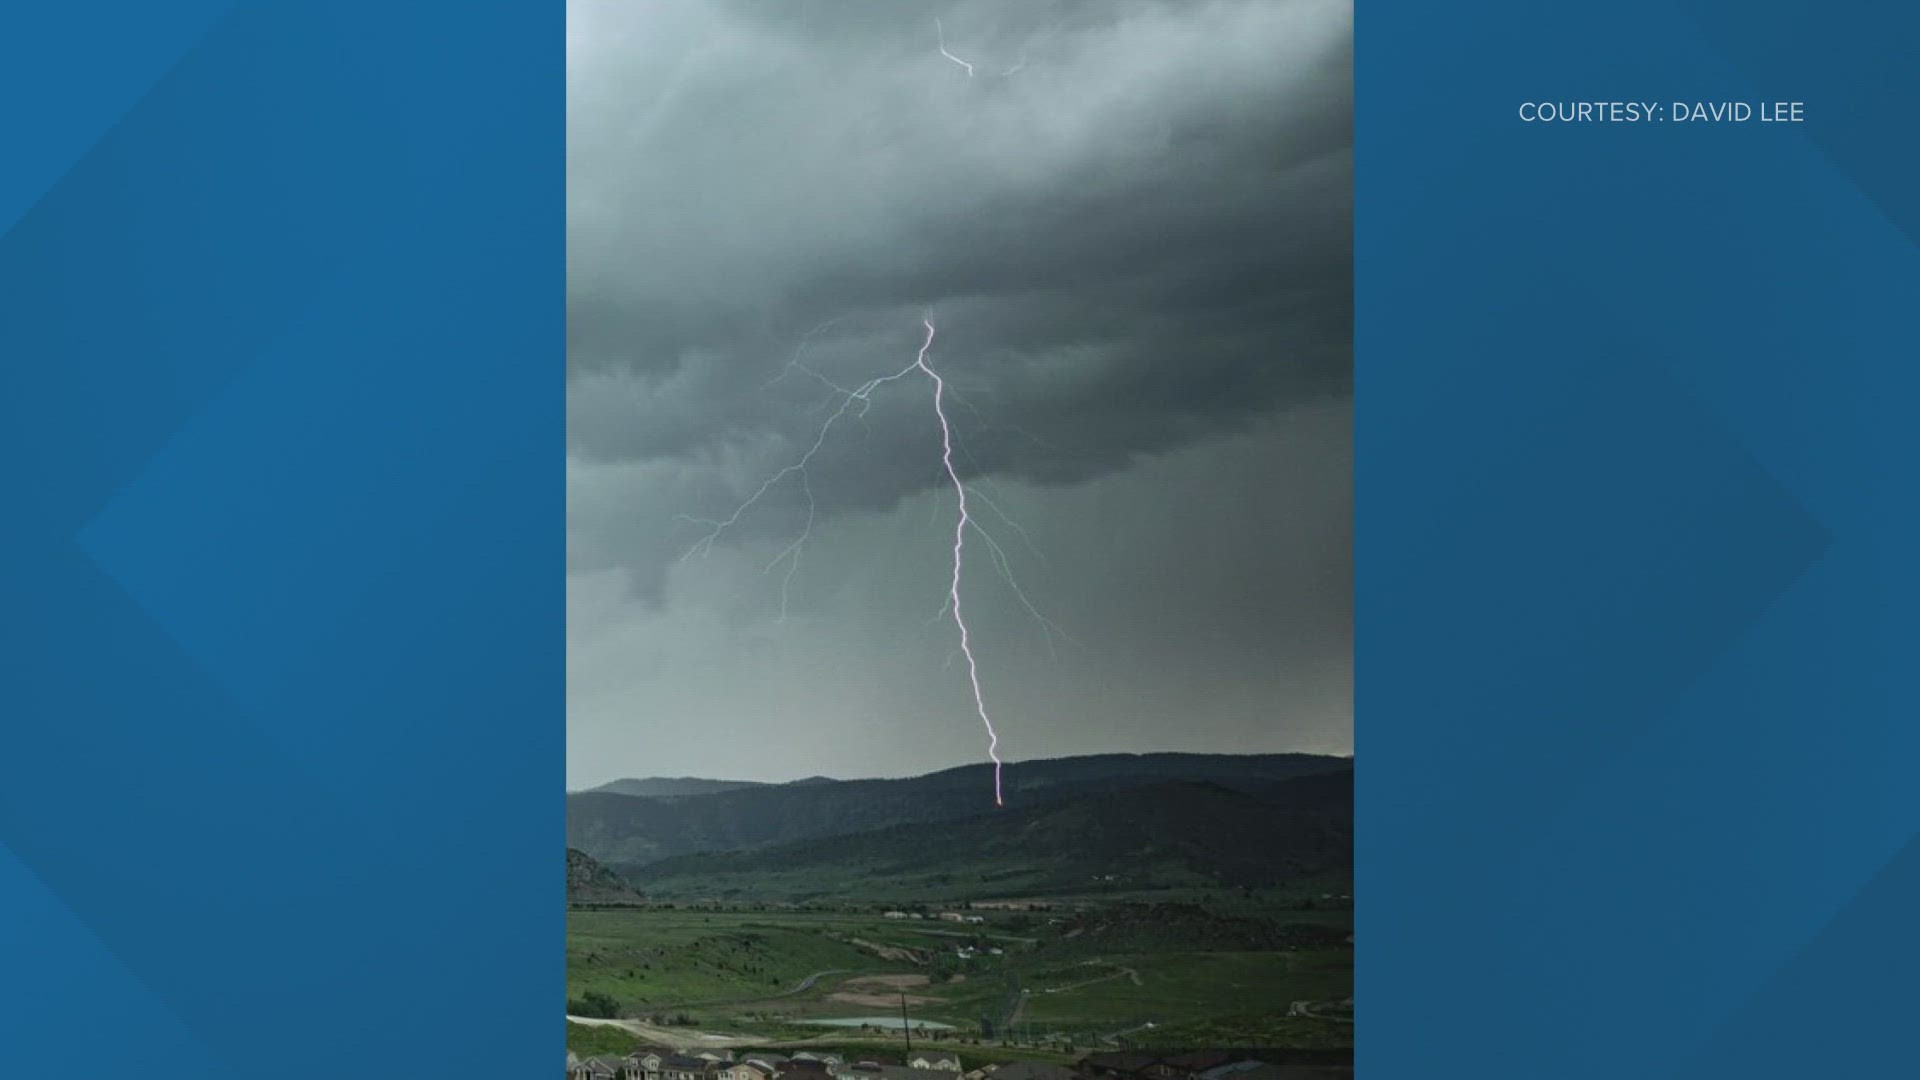 The NWS issued a Severe Thunderstorm Watch for parts of Colorado, including the metro area, the I-25 corridor, and parts of eastern Colorado until 9 p.m. Friday.